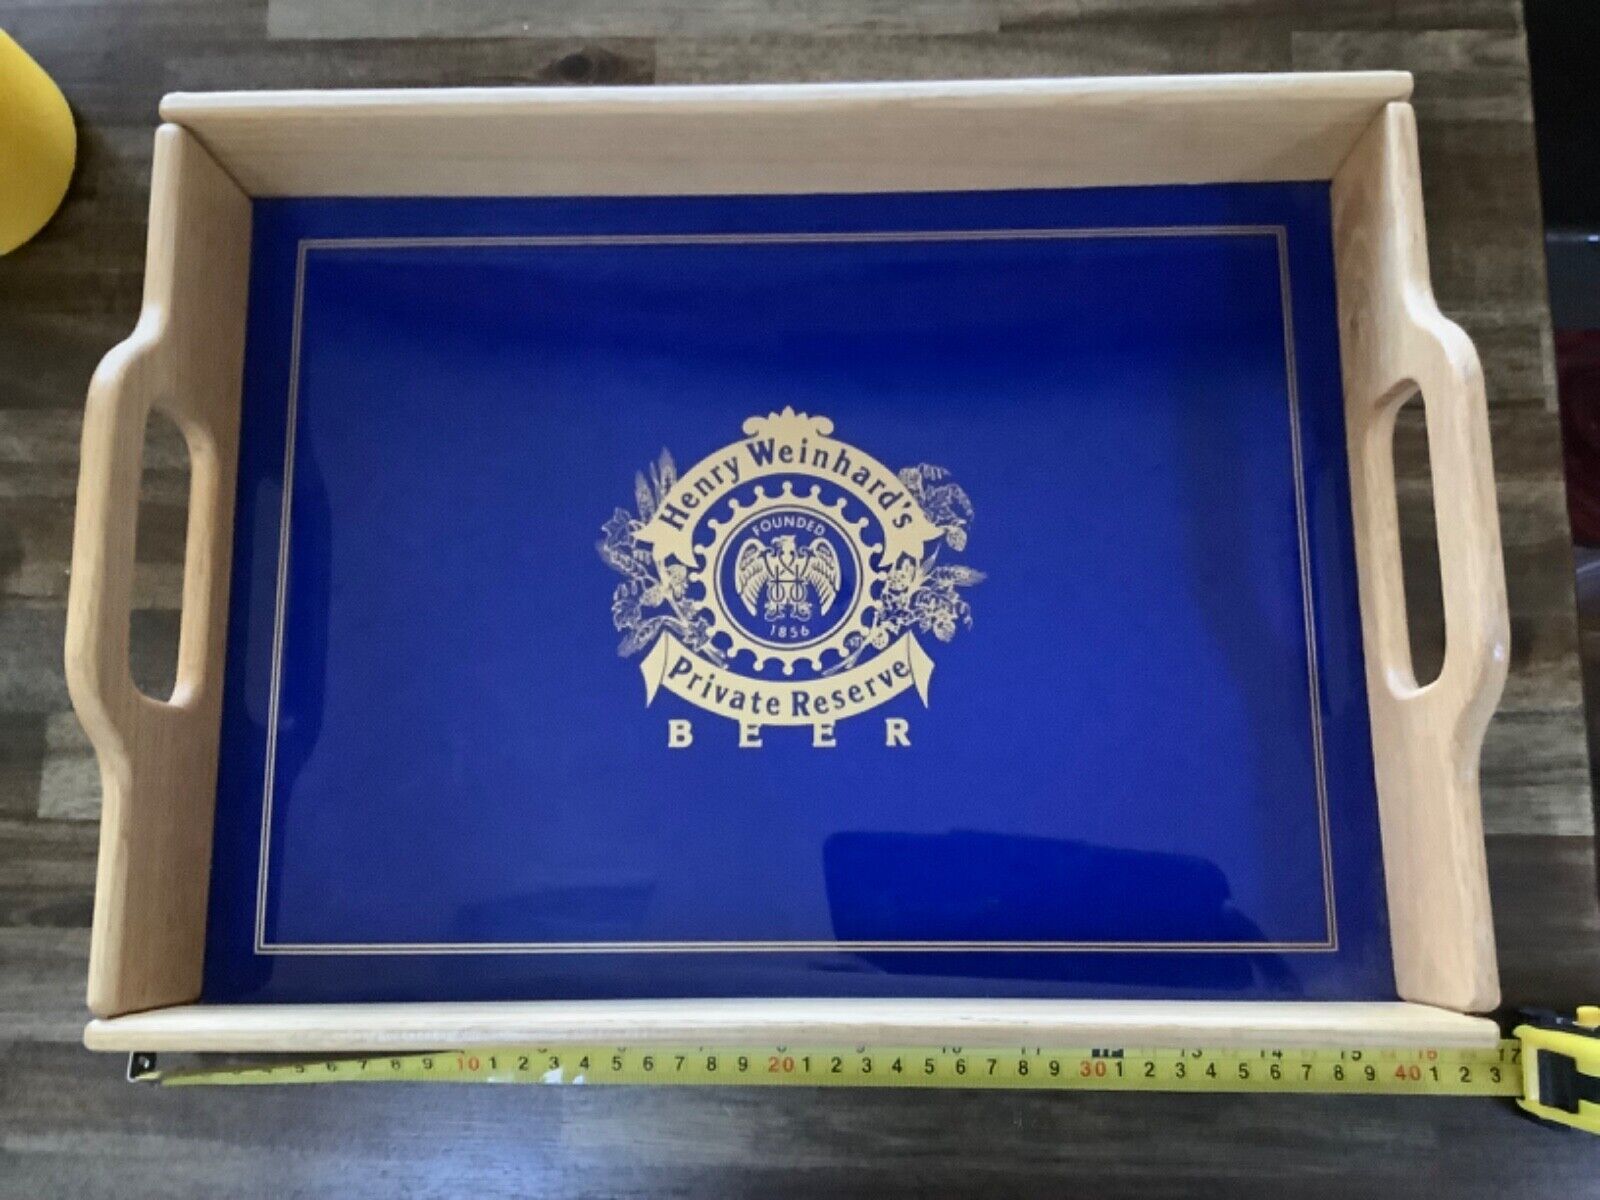 RARE Vintage Henry Weinhard’s Private Reserve Beer serving tray. Mint Condition